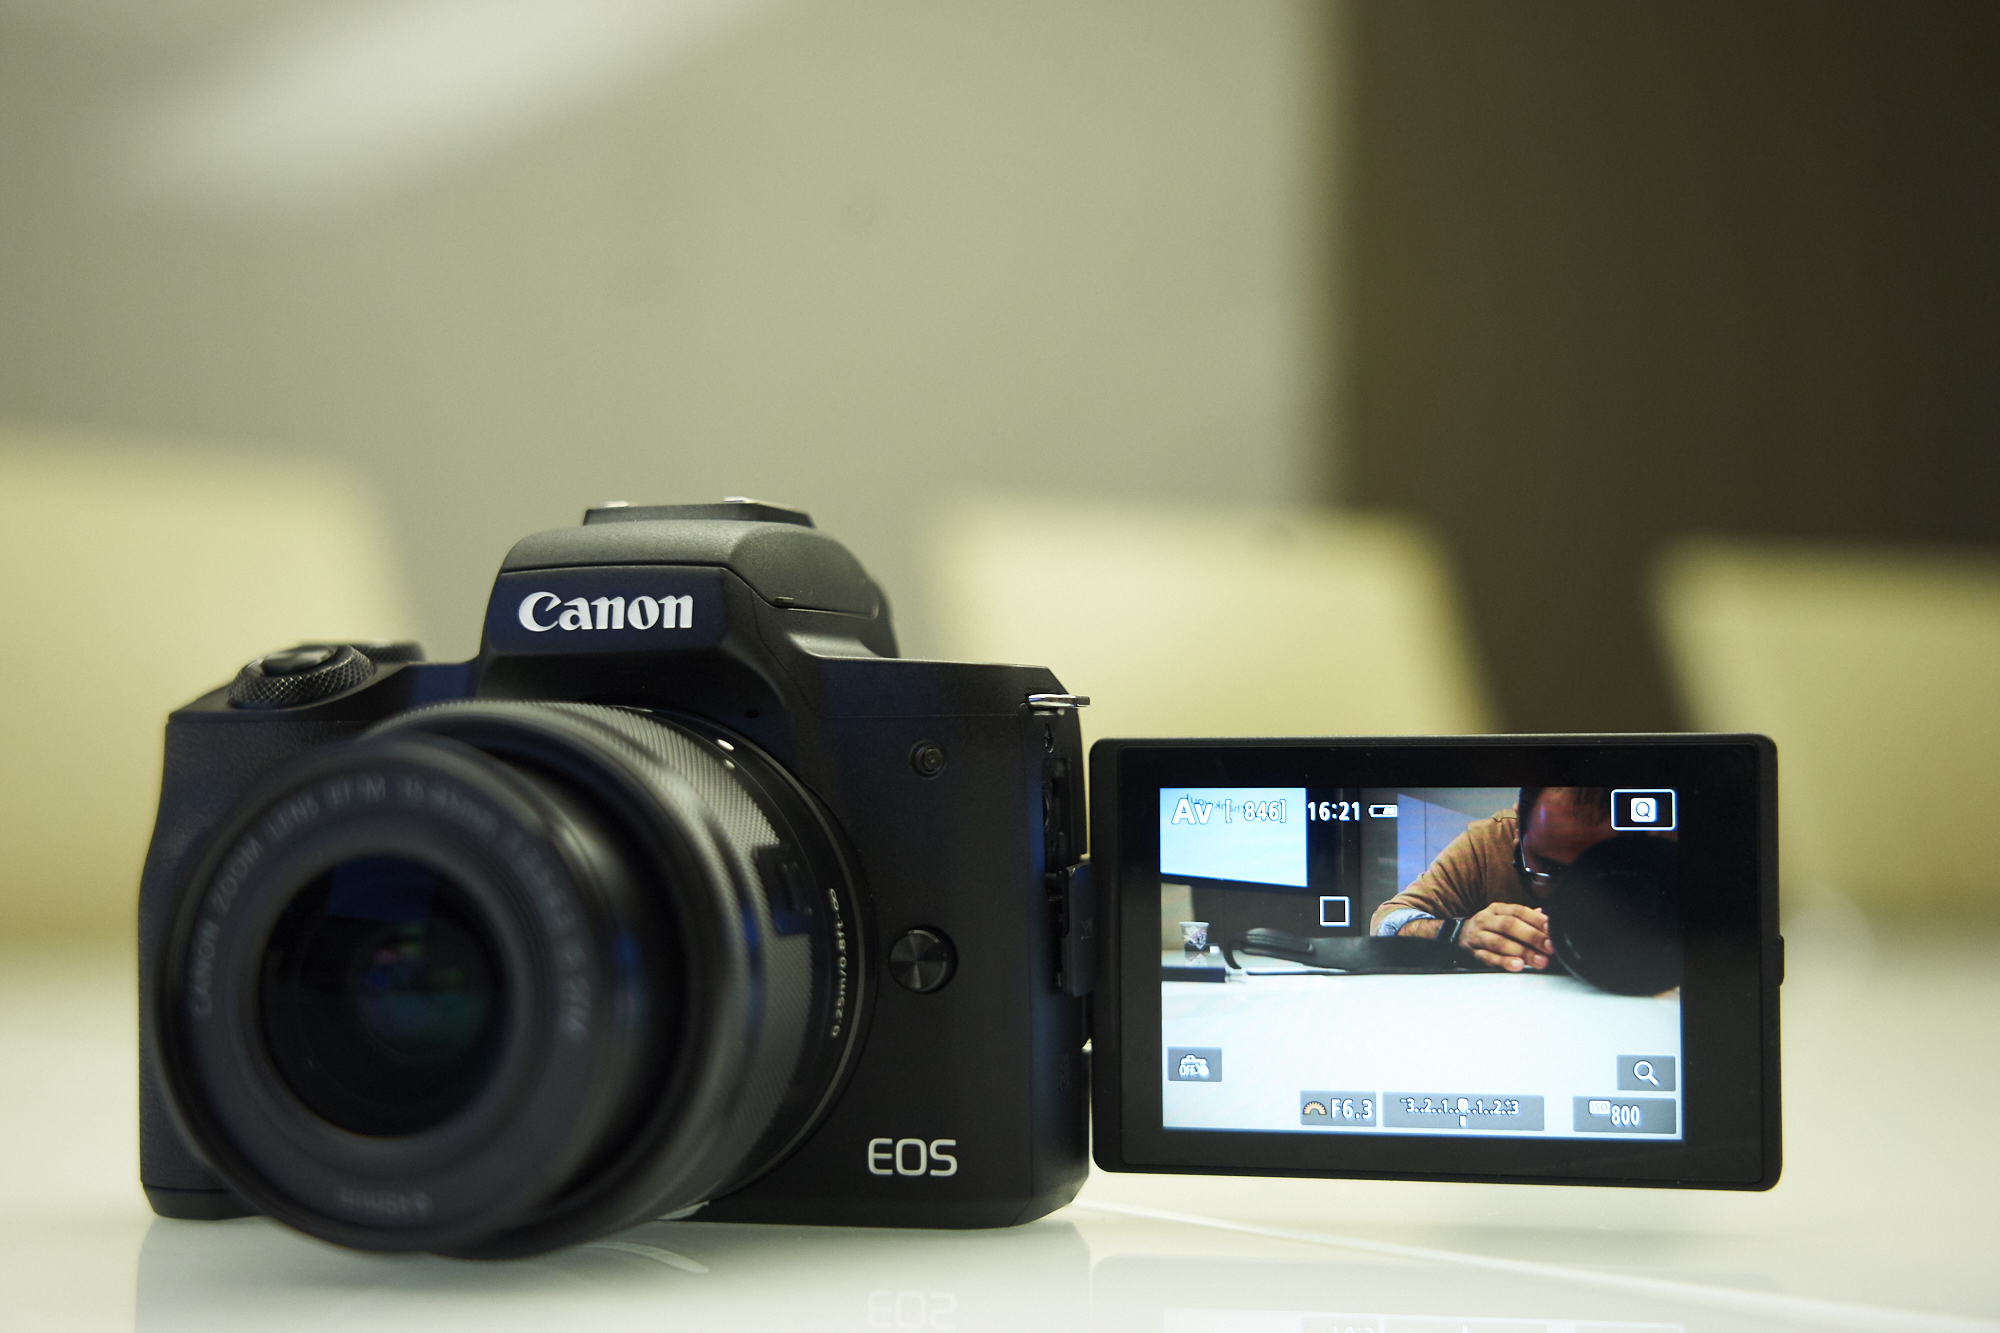 Canon M50 Review: Canon releases their first 4K mirrorless